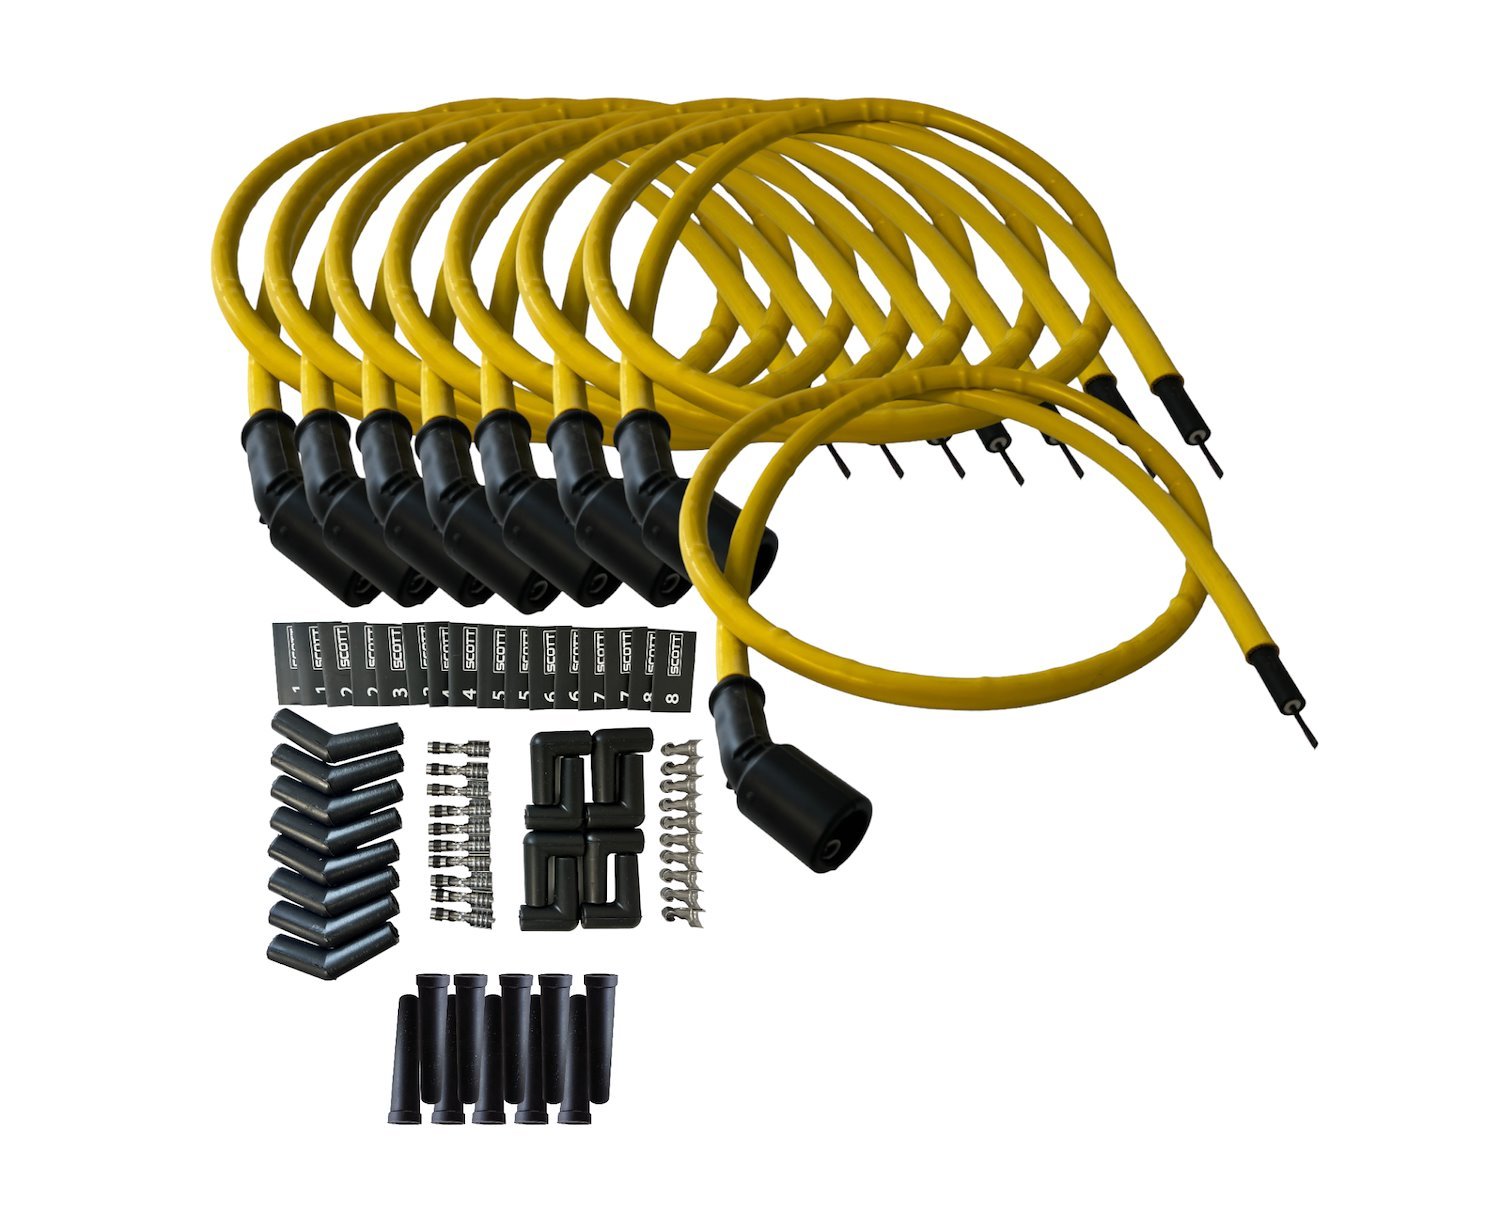 SPW-CH-LSRELO-7 DIY High-Performance Silicone-Sleeved Spark Plug Wire Set, GM LS [Yellow]